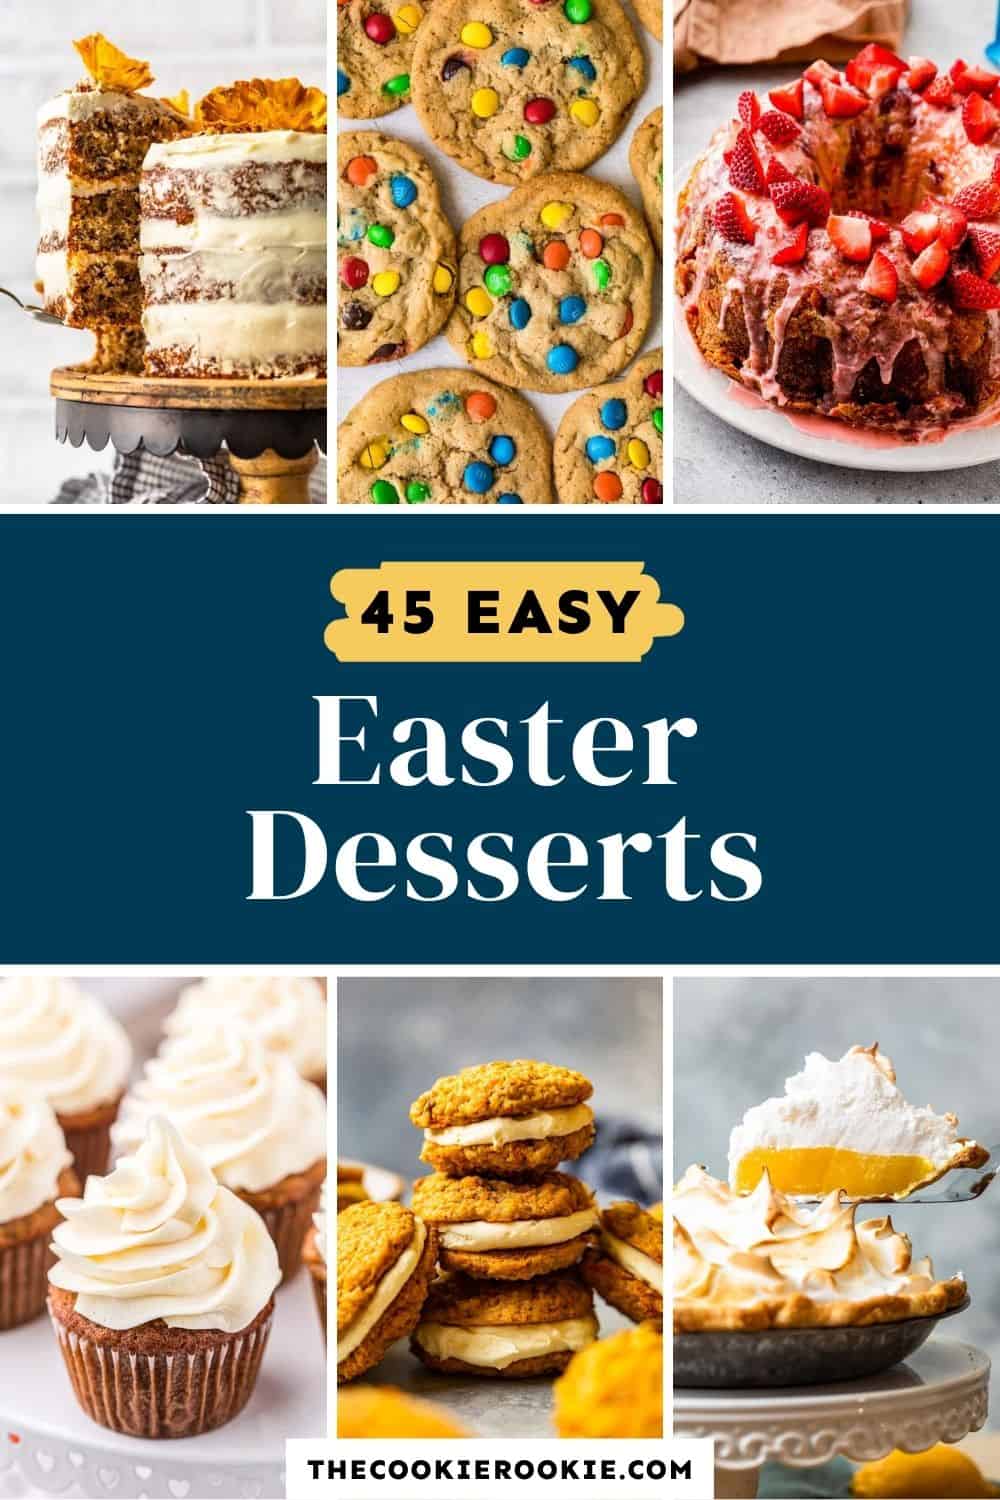 45 Easy Easter Desserts to Make This Year - The Cookie Rookie®